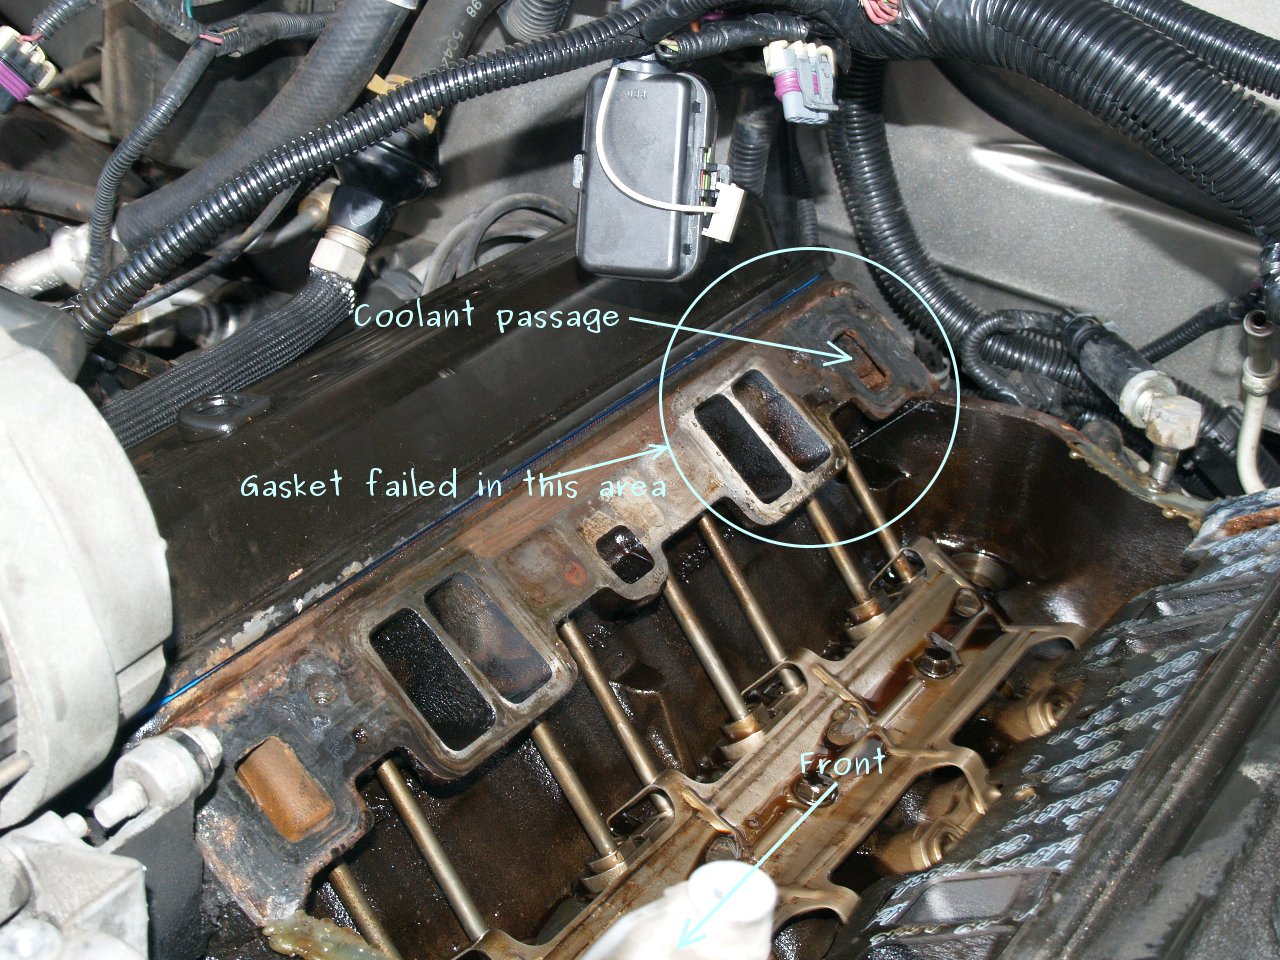 See P0522 in engine